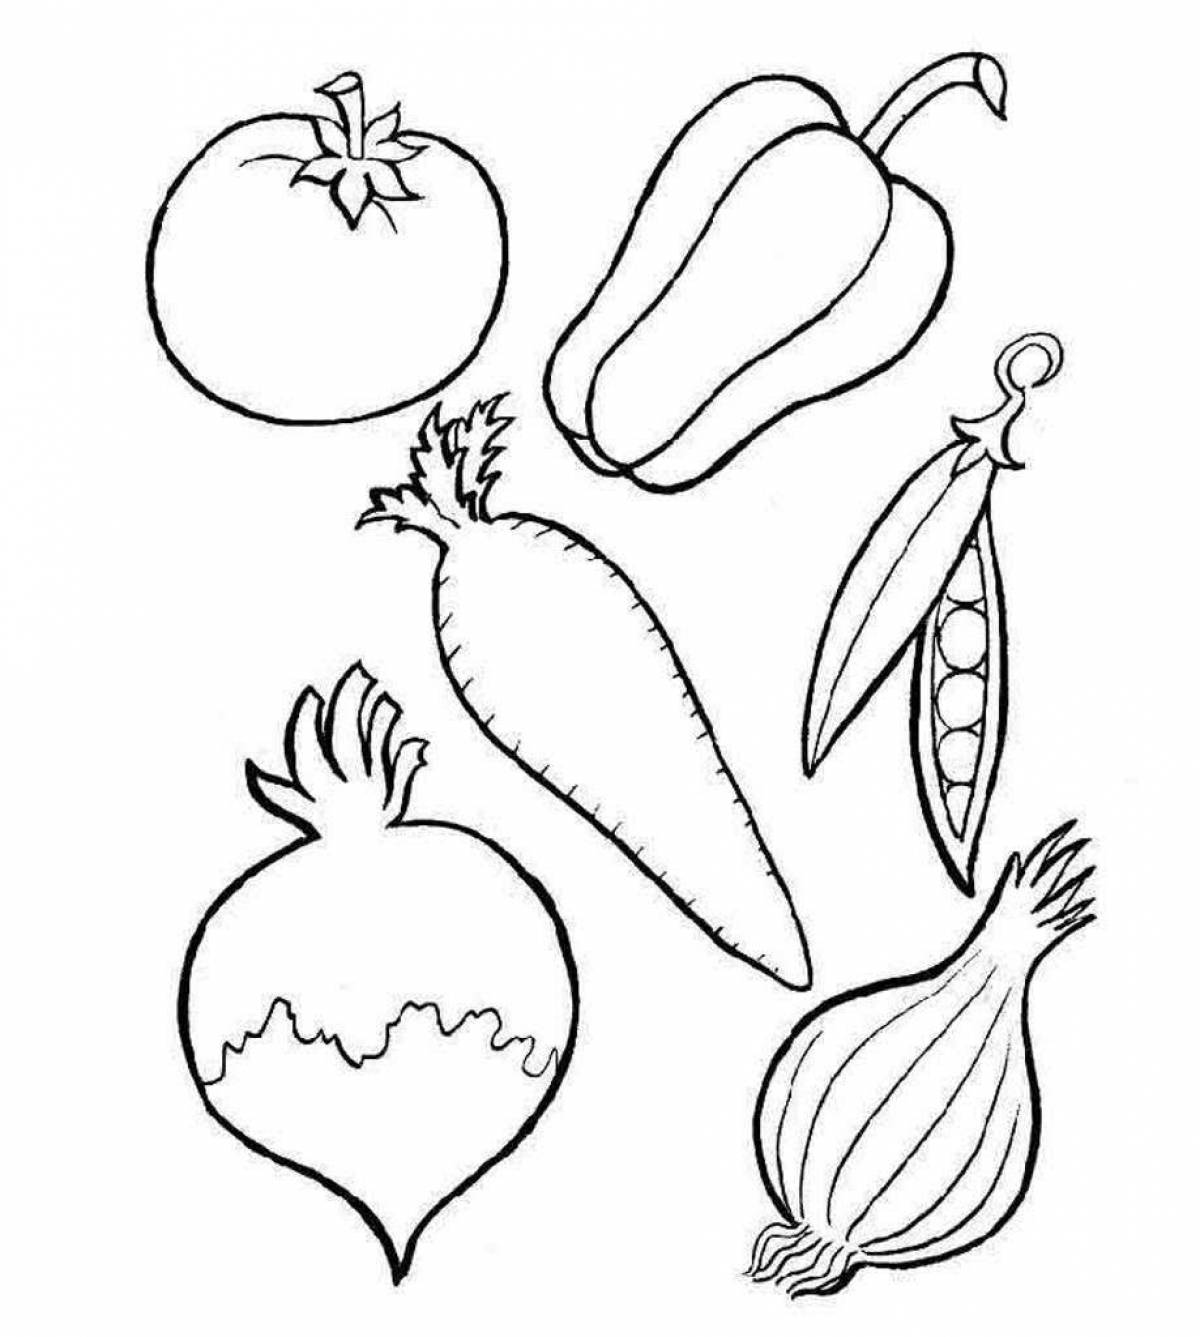 Wonderful vegetable coloring book for kids 6-7 years old